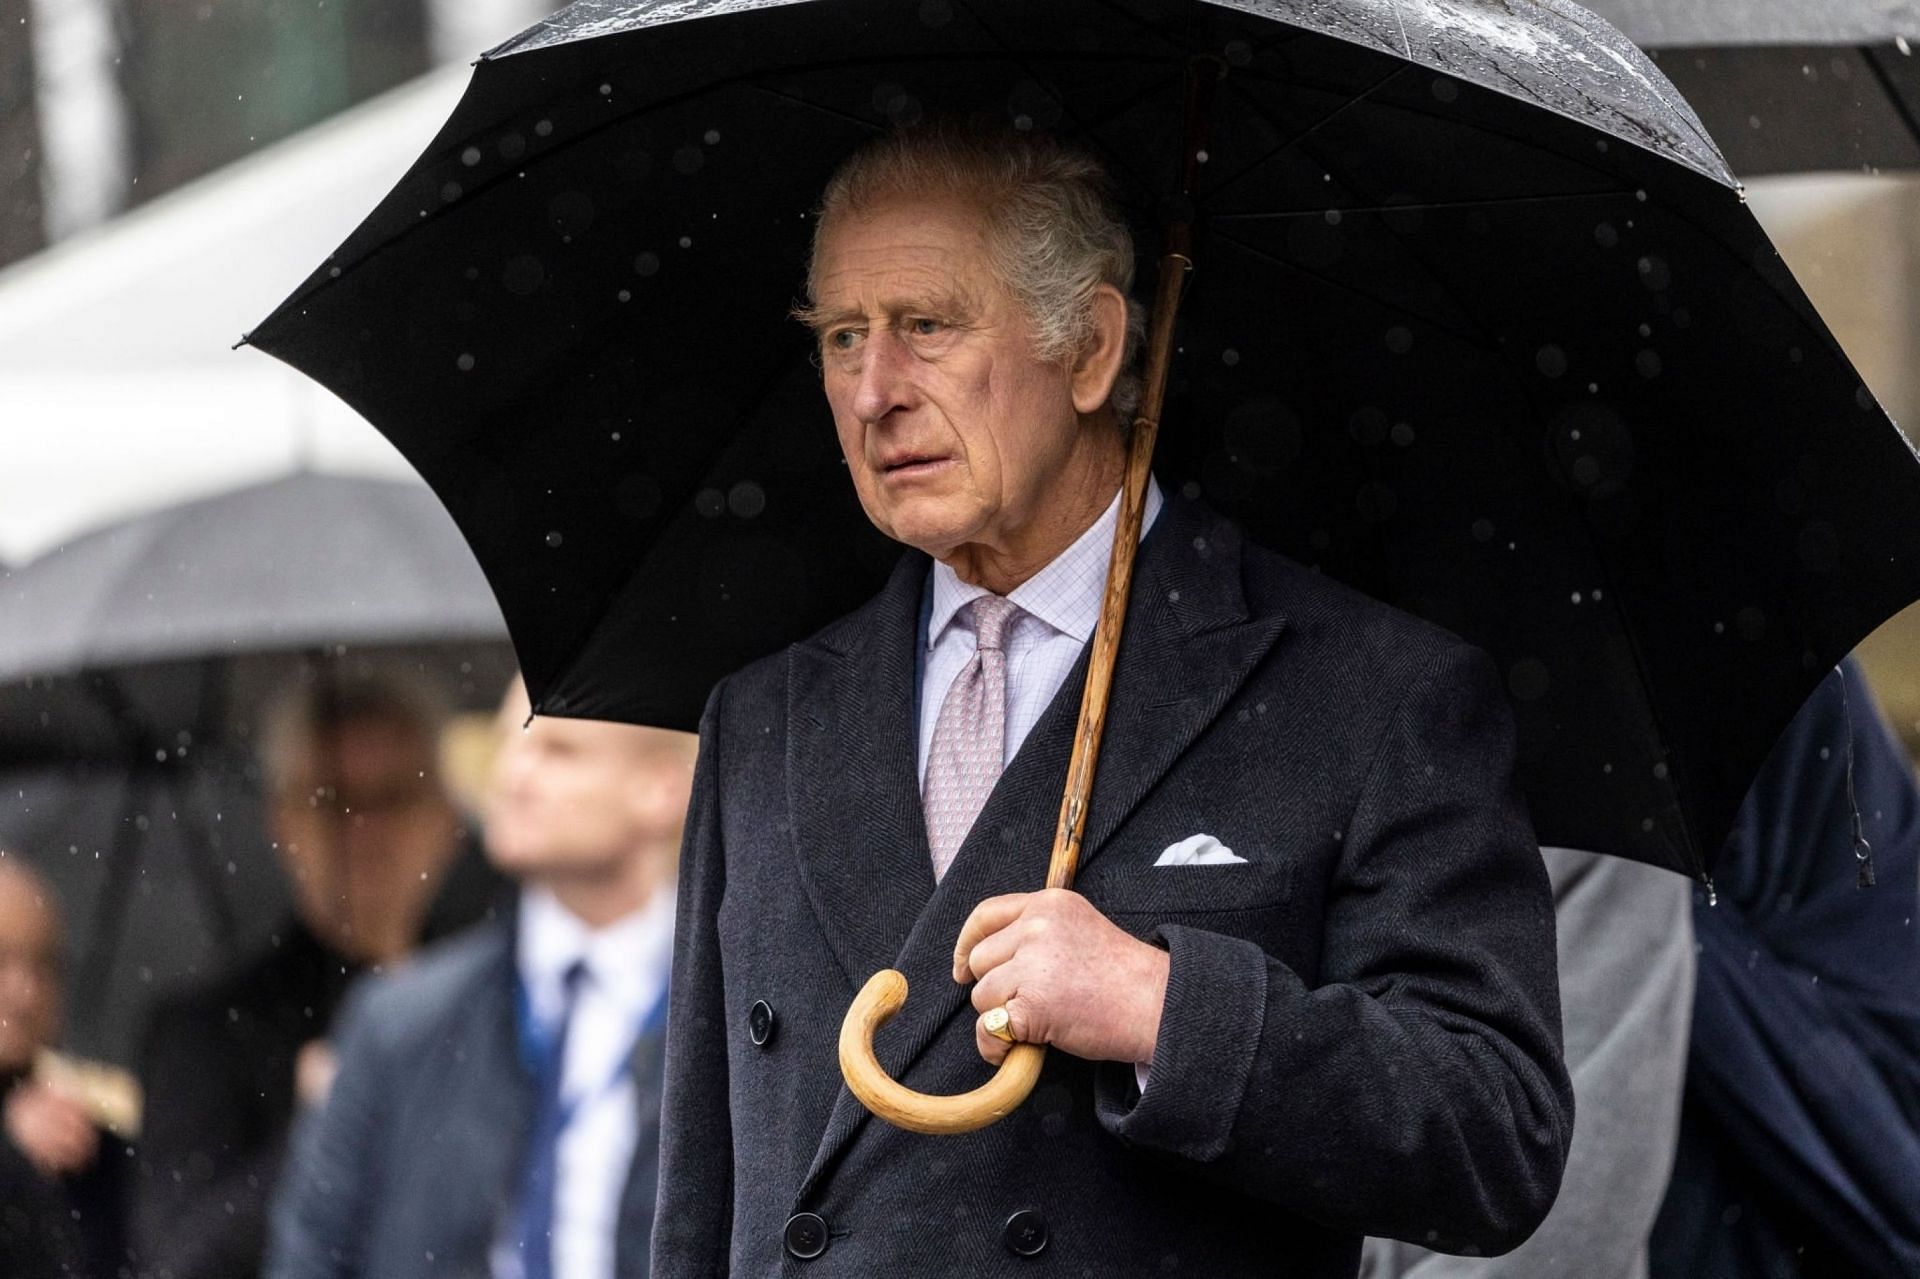 Prince Charles, soon to be king, at the  St. Nikolai Memorial Church on March 31, 2023 in Hamburg, Germany(Image via Getty Images)